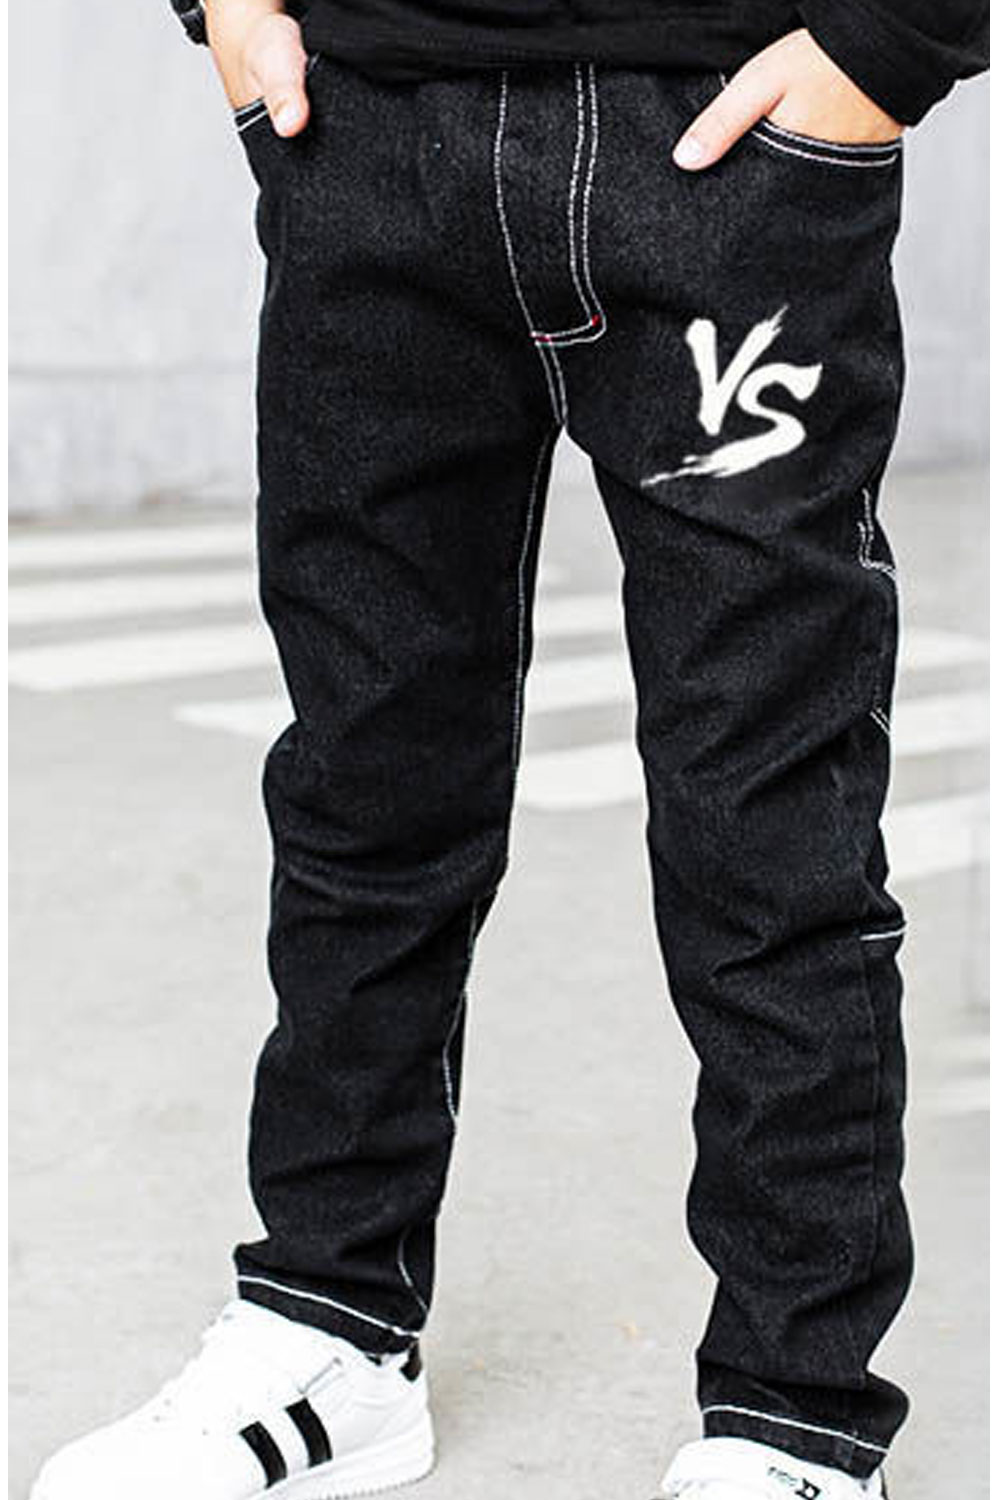 Selected Color is VS letter [single pants]